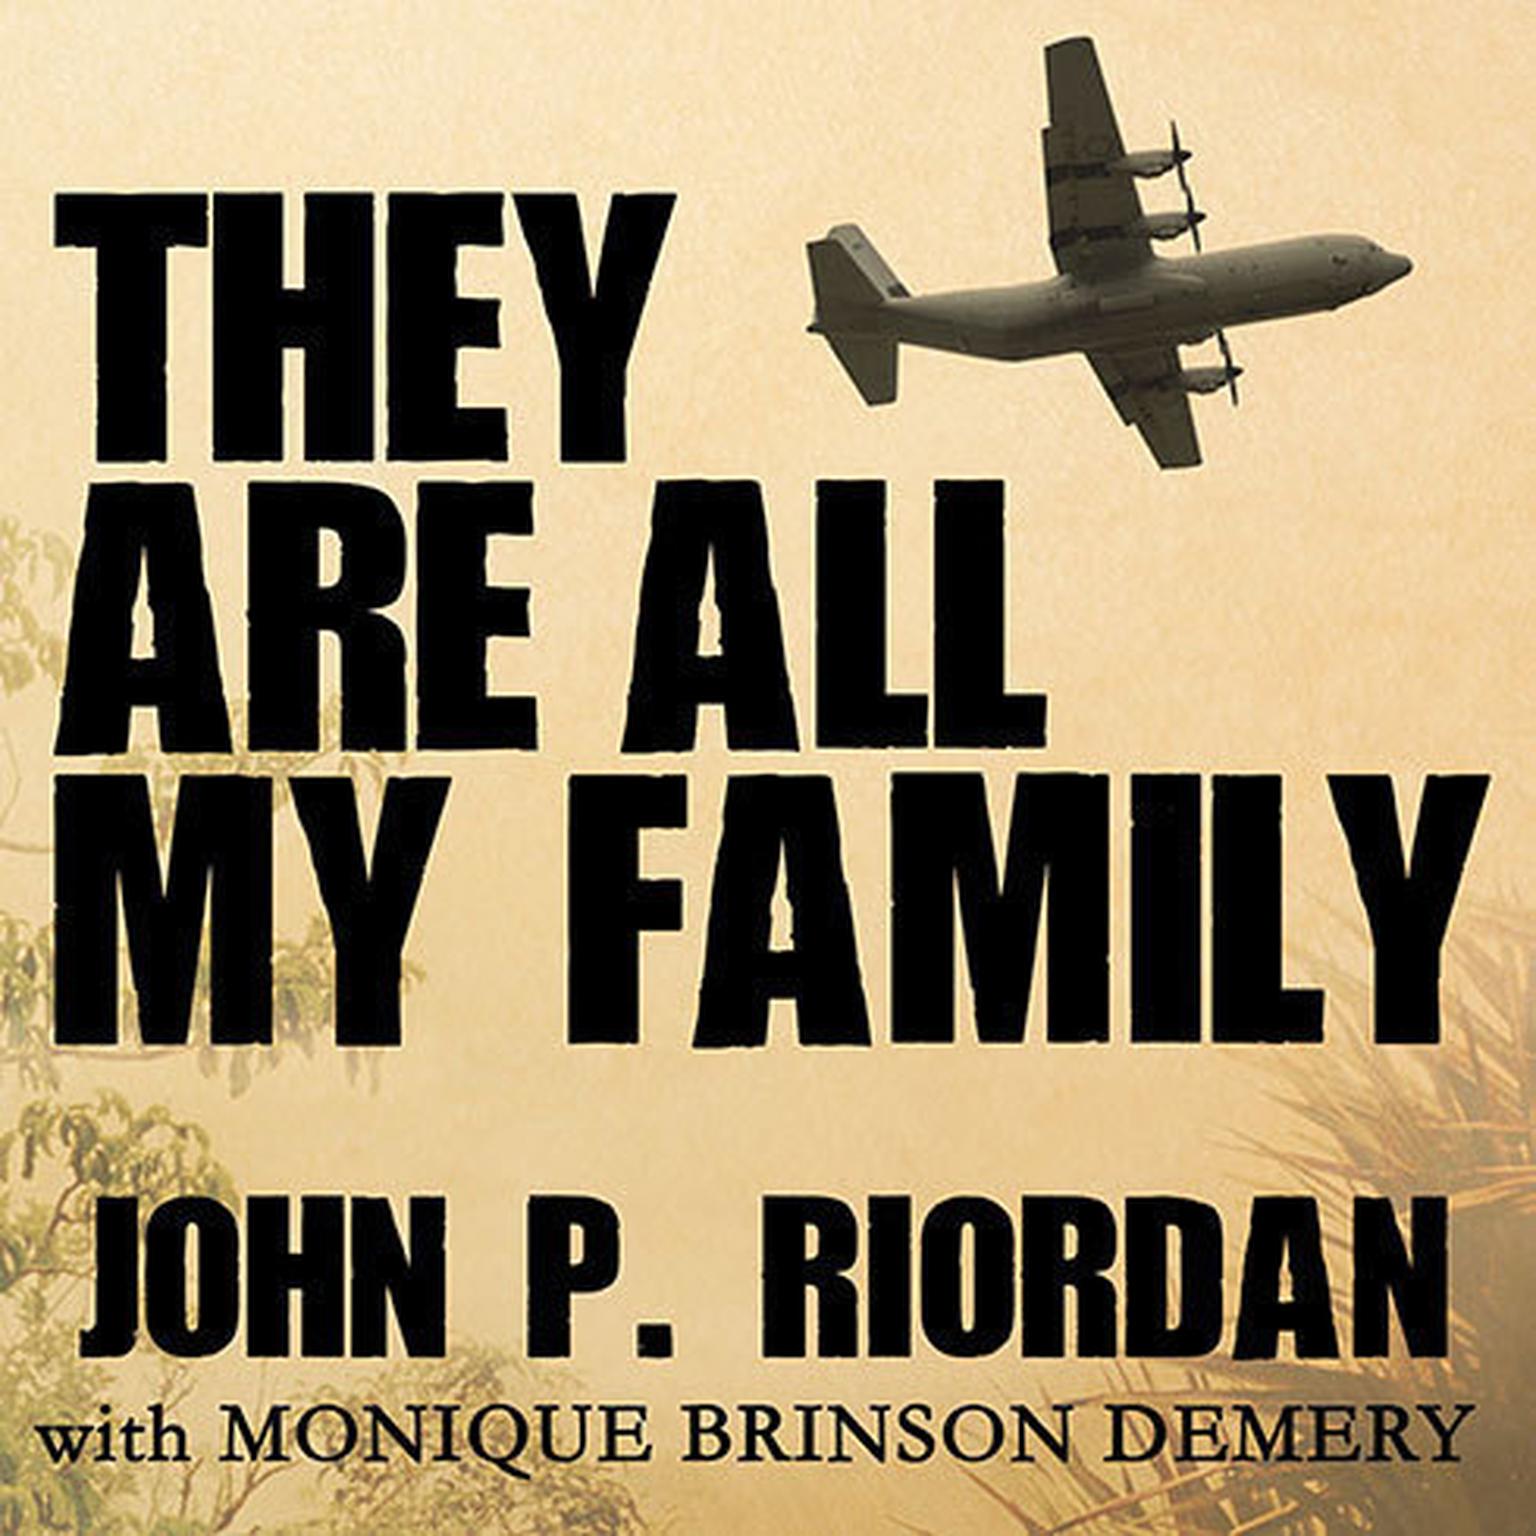 They Are All My Family: A Daring Rescue in the Chaos of Saigons Fall Audiobook, by John P. Riordan